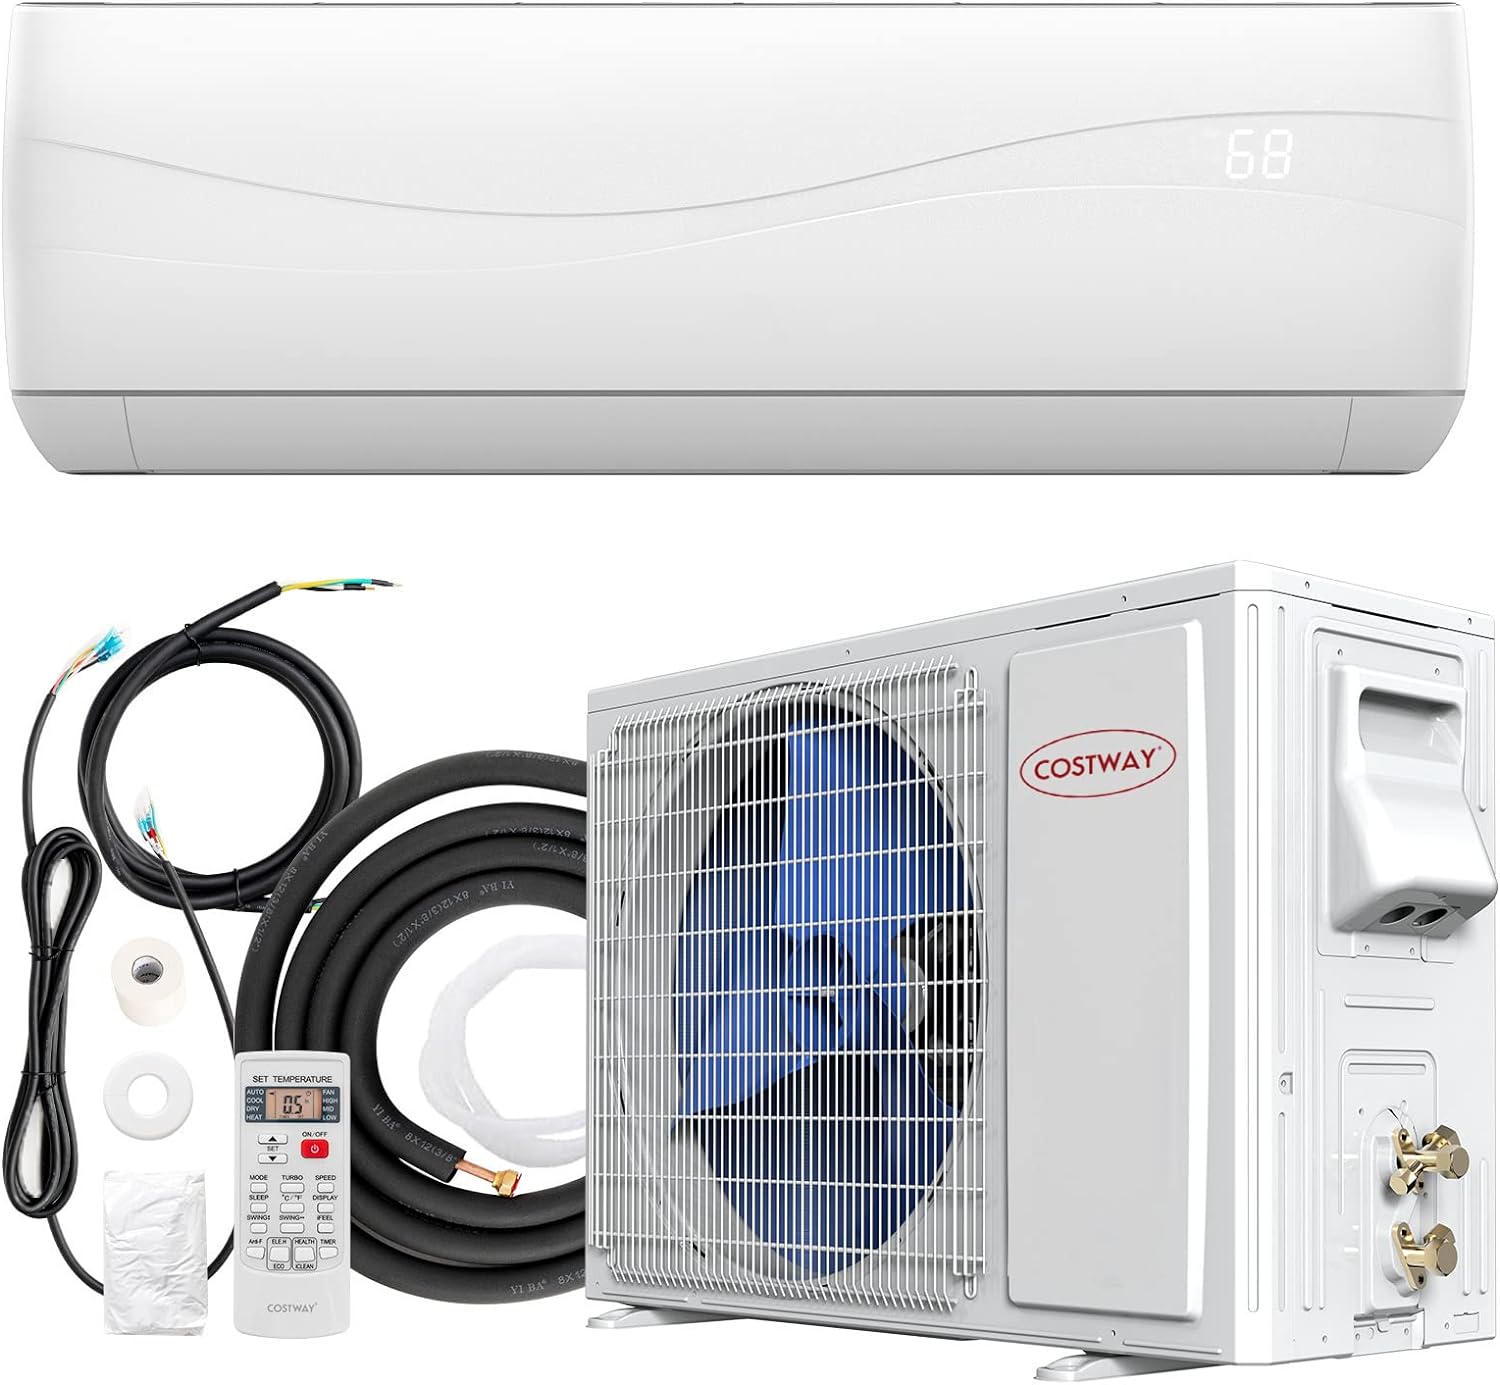 COSTWAY 12000BTU Mini Split Air Conditioner& Heater,20 SEER2 115V Wall-Mounted Ductless AC Unit Cools Rooms up to 750 Sq. Ft, Energy Efficient Inverter AC with Heat Pump & Installation Kit